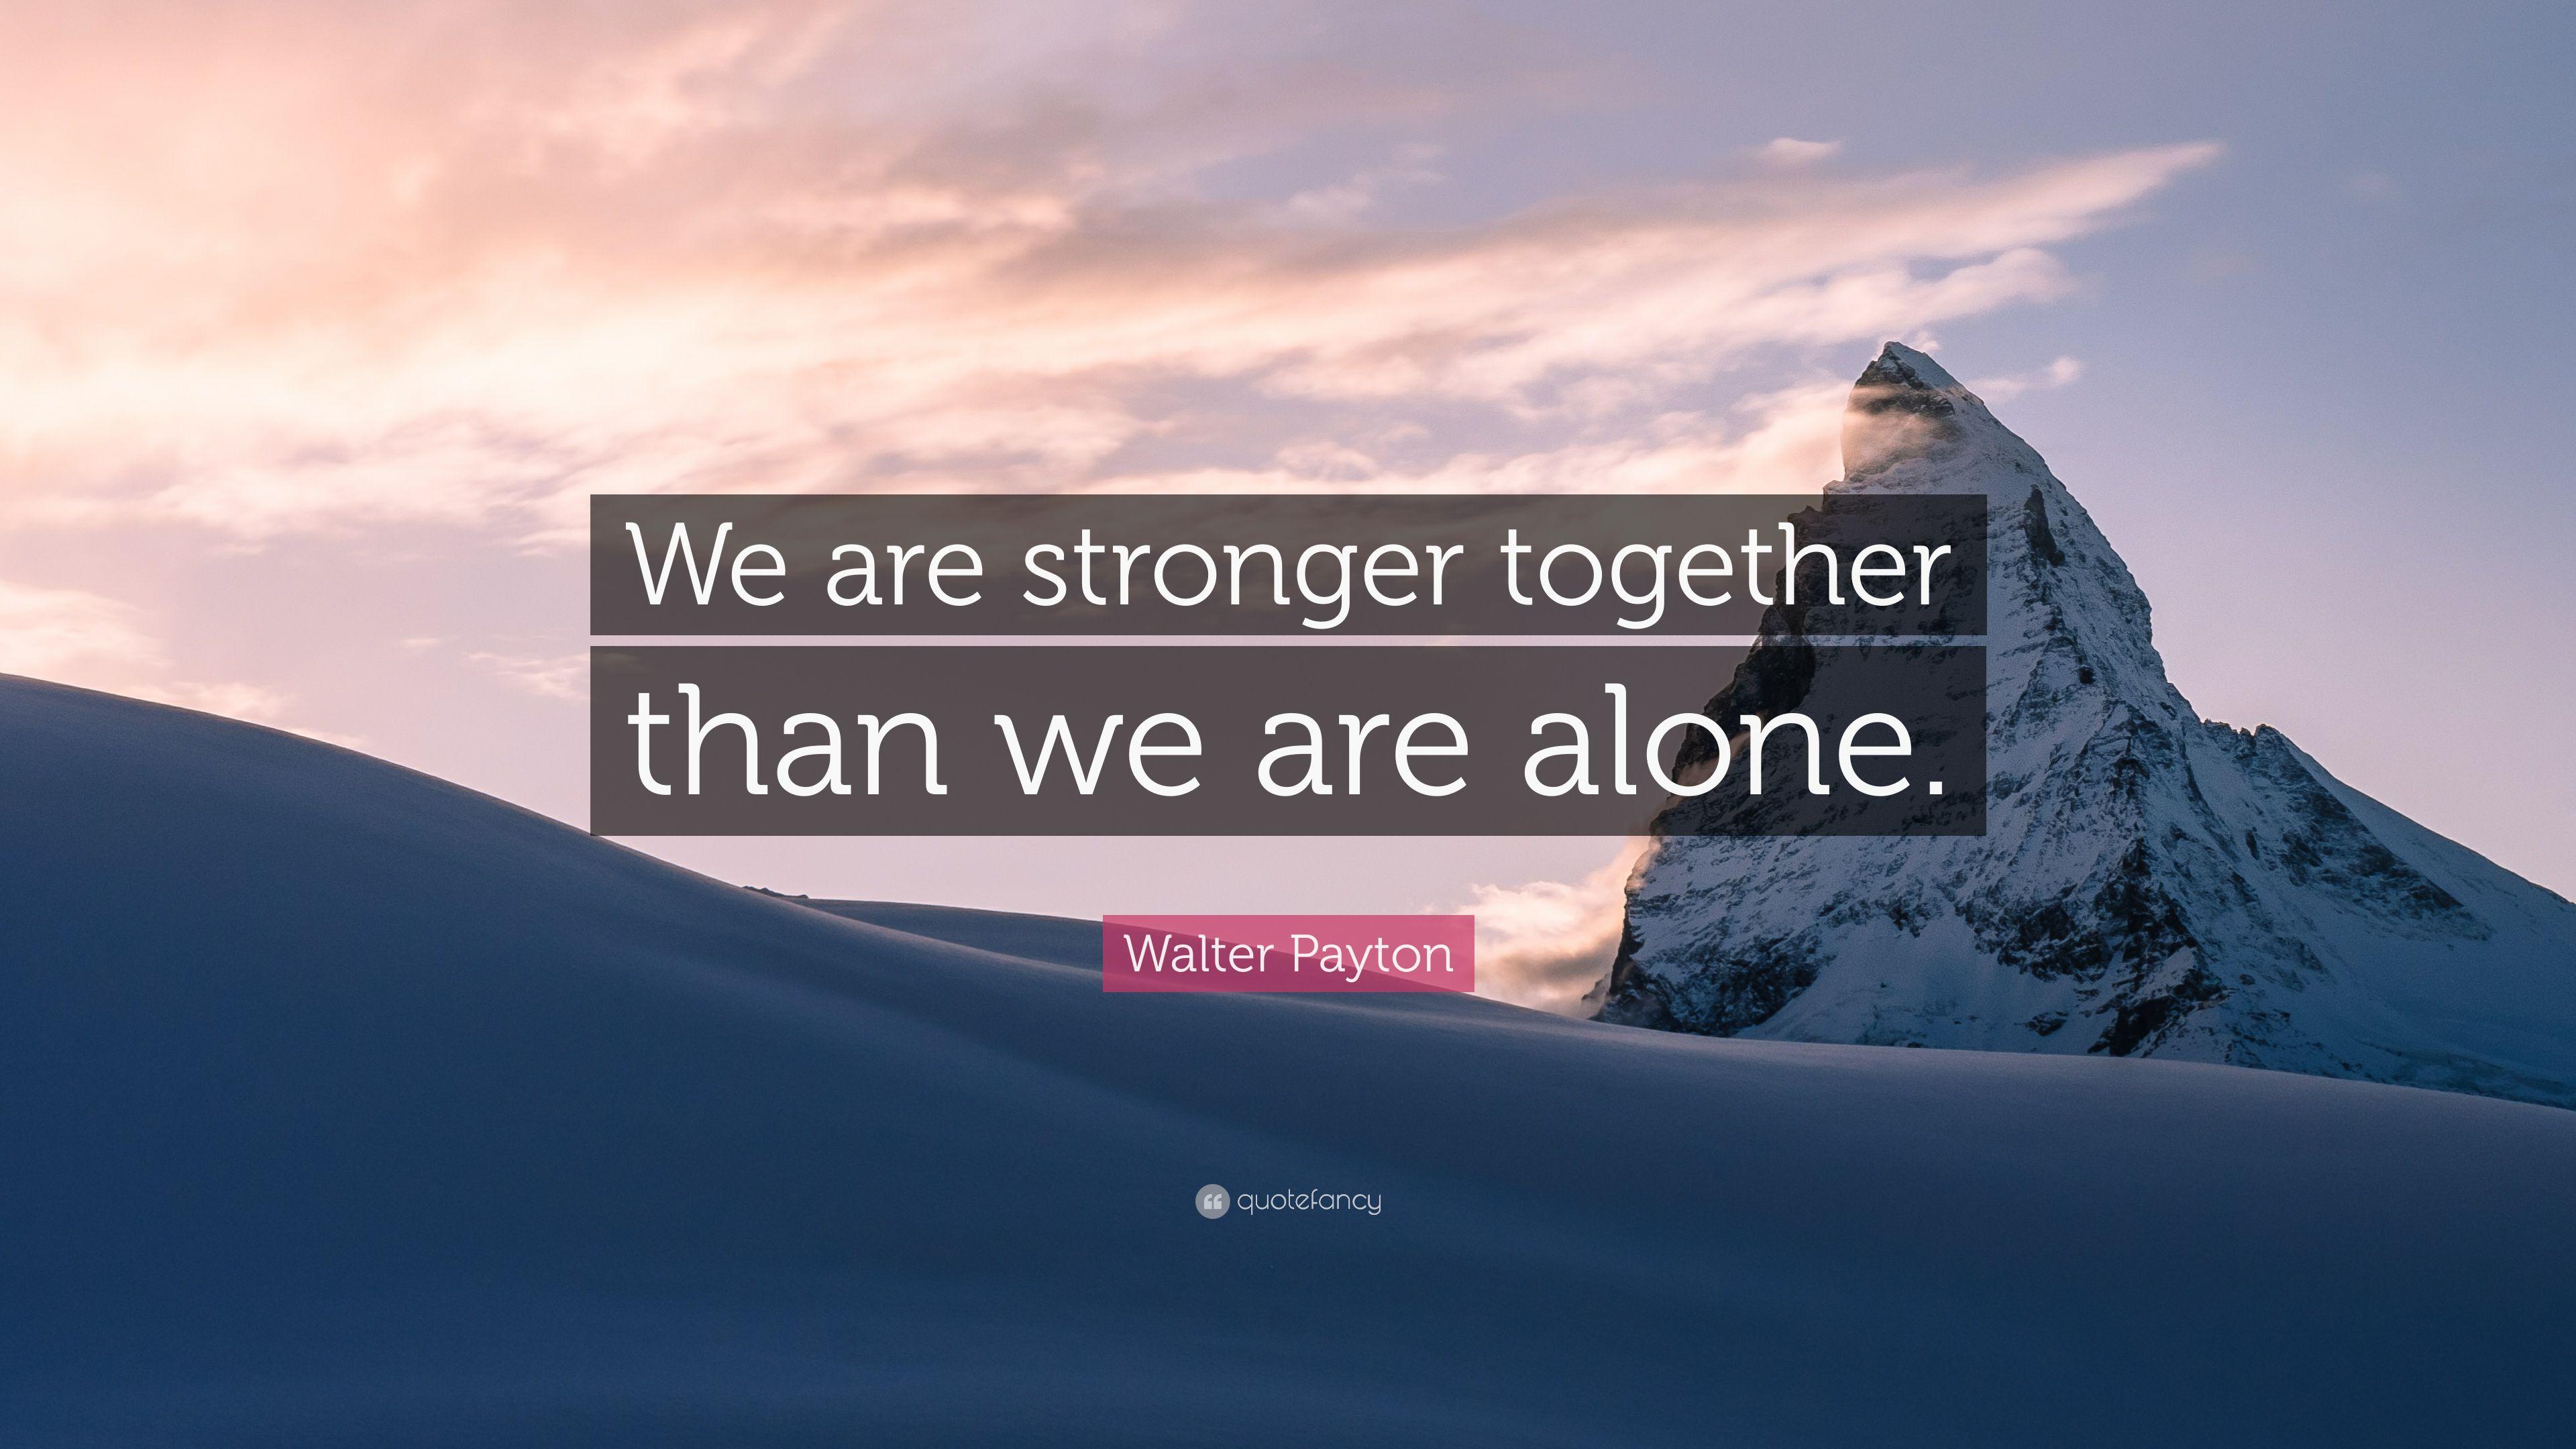 Walter Payton Quote: “We are stronger together than we are alone